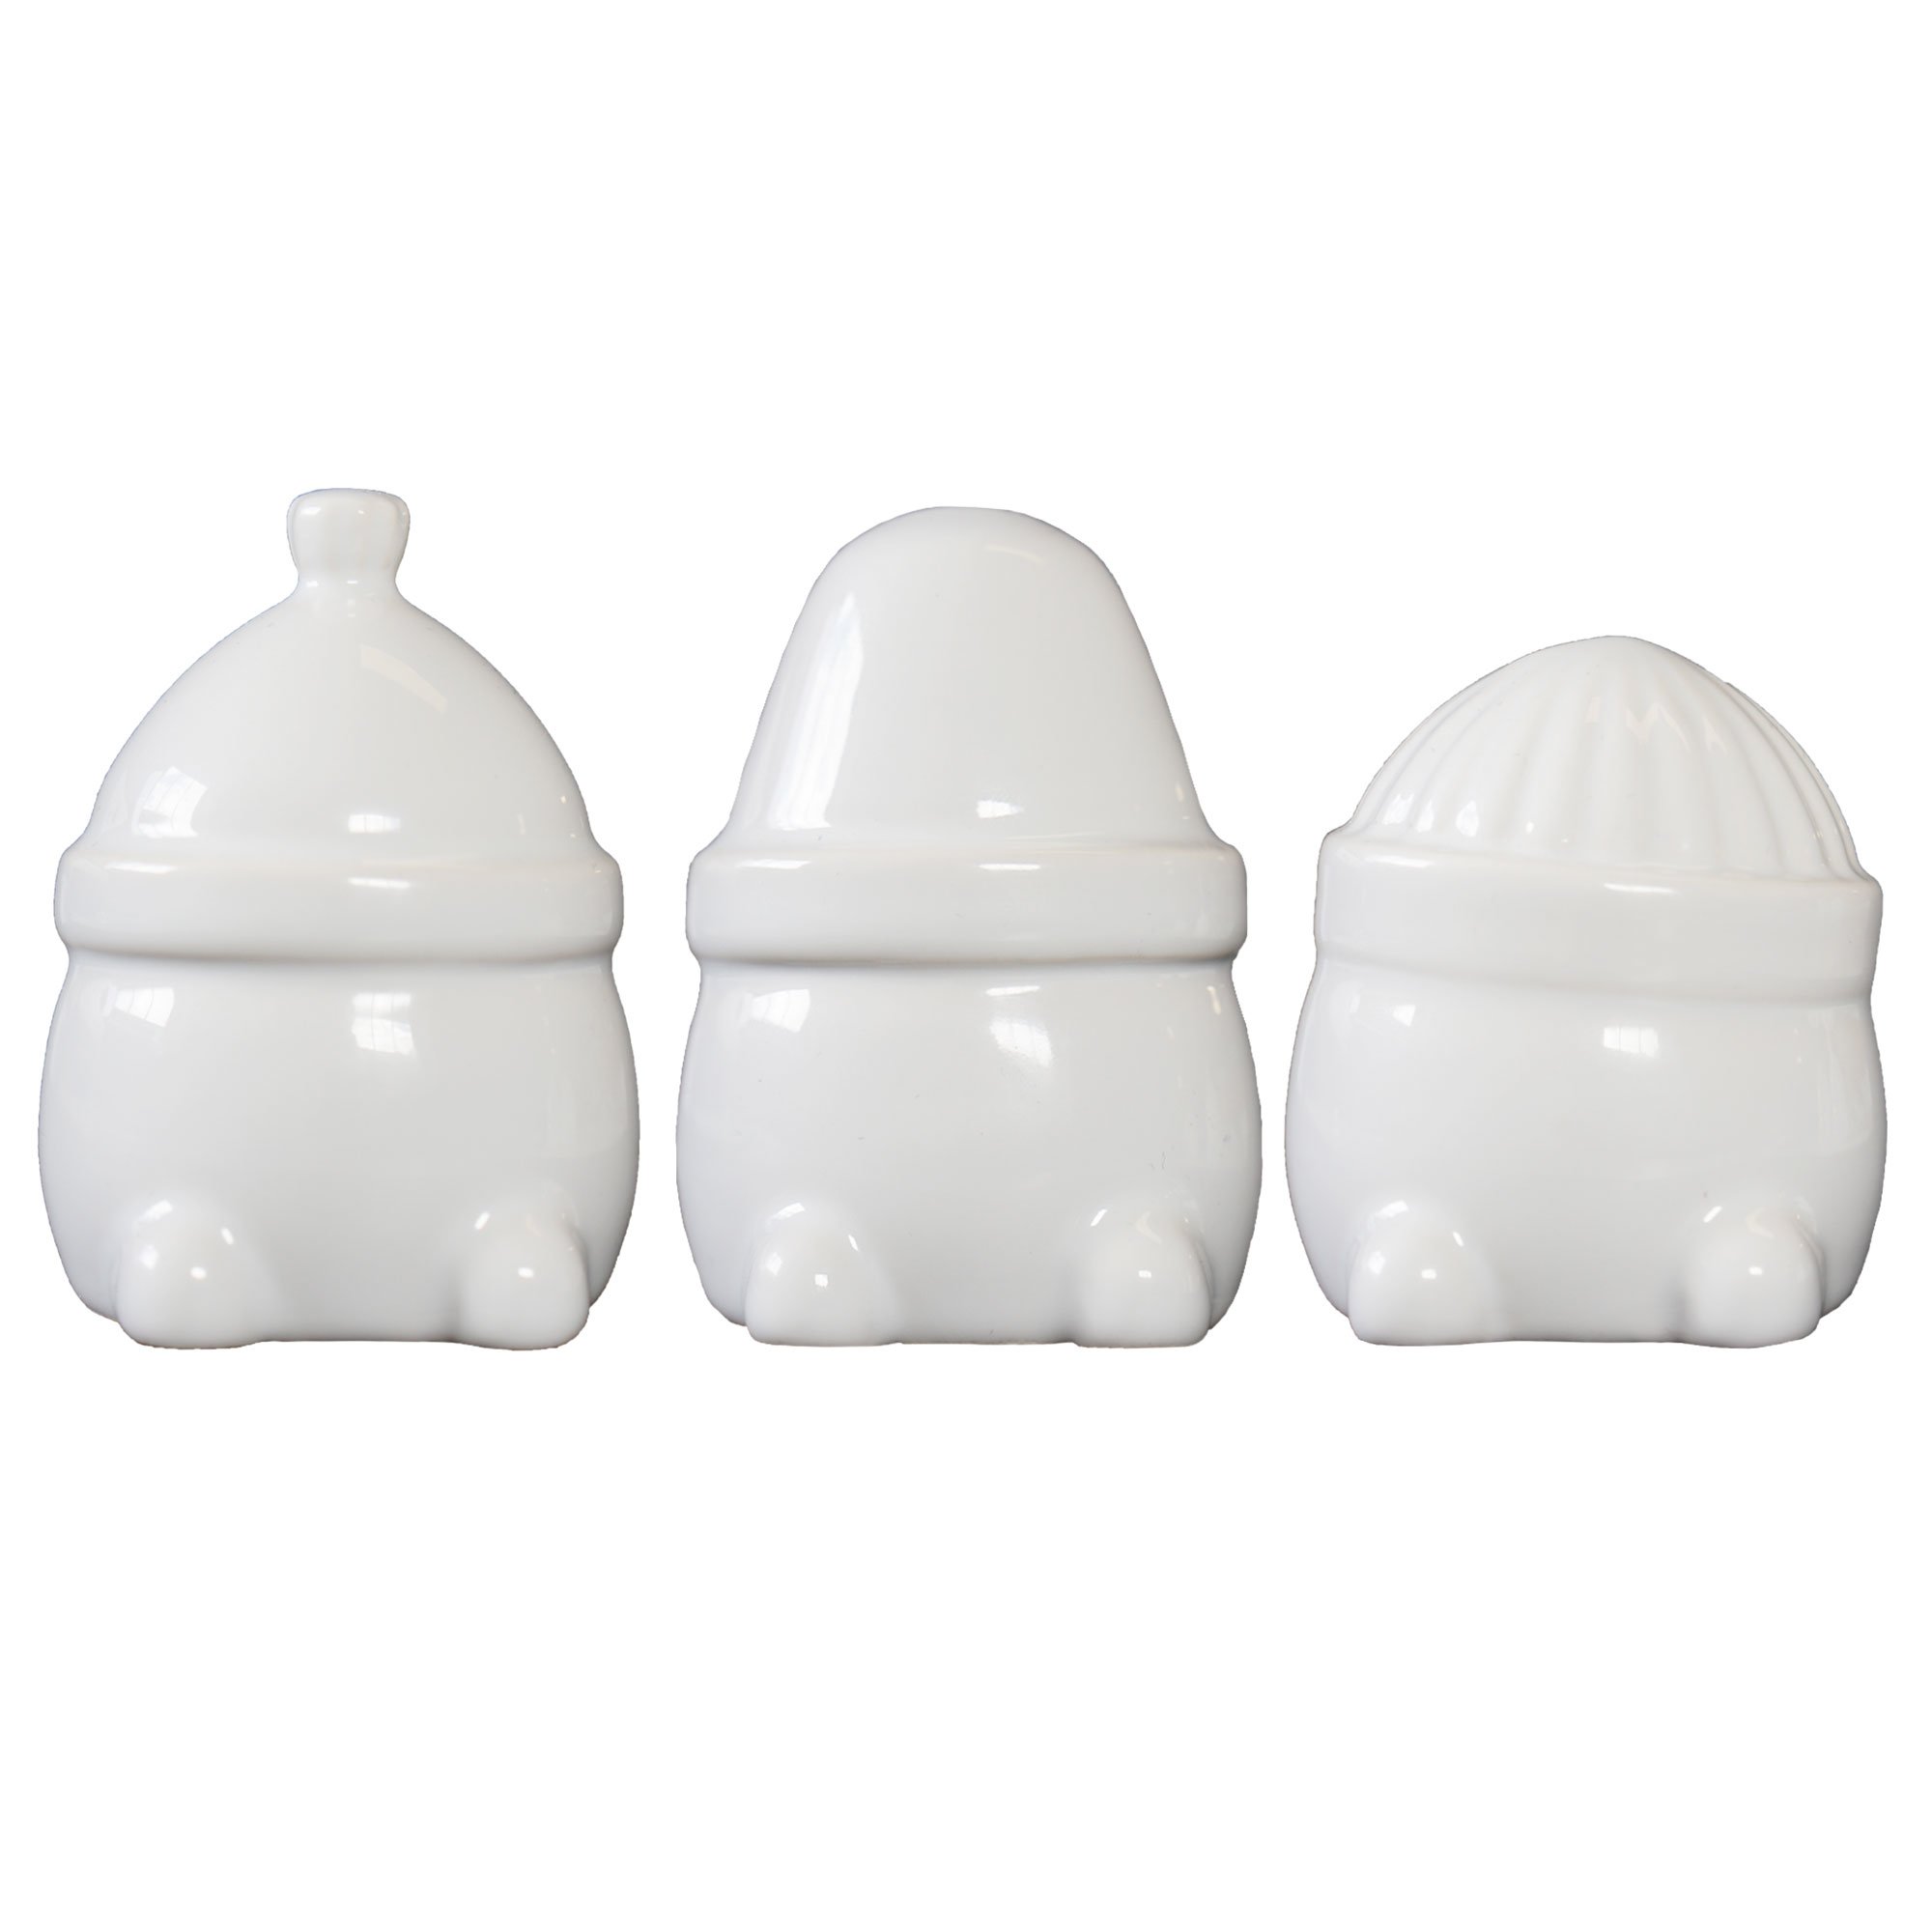 DBKD Hipster Triplets tomte 3-pack shiny white